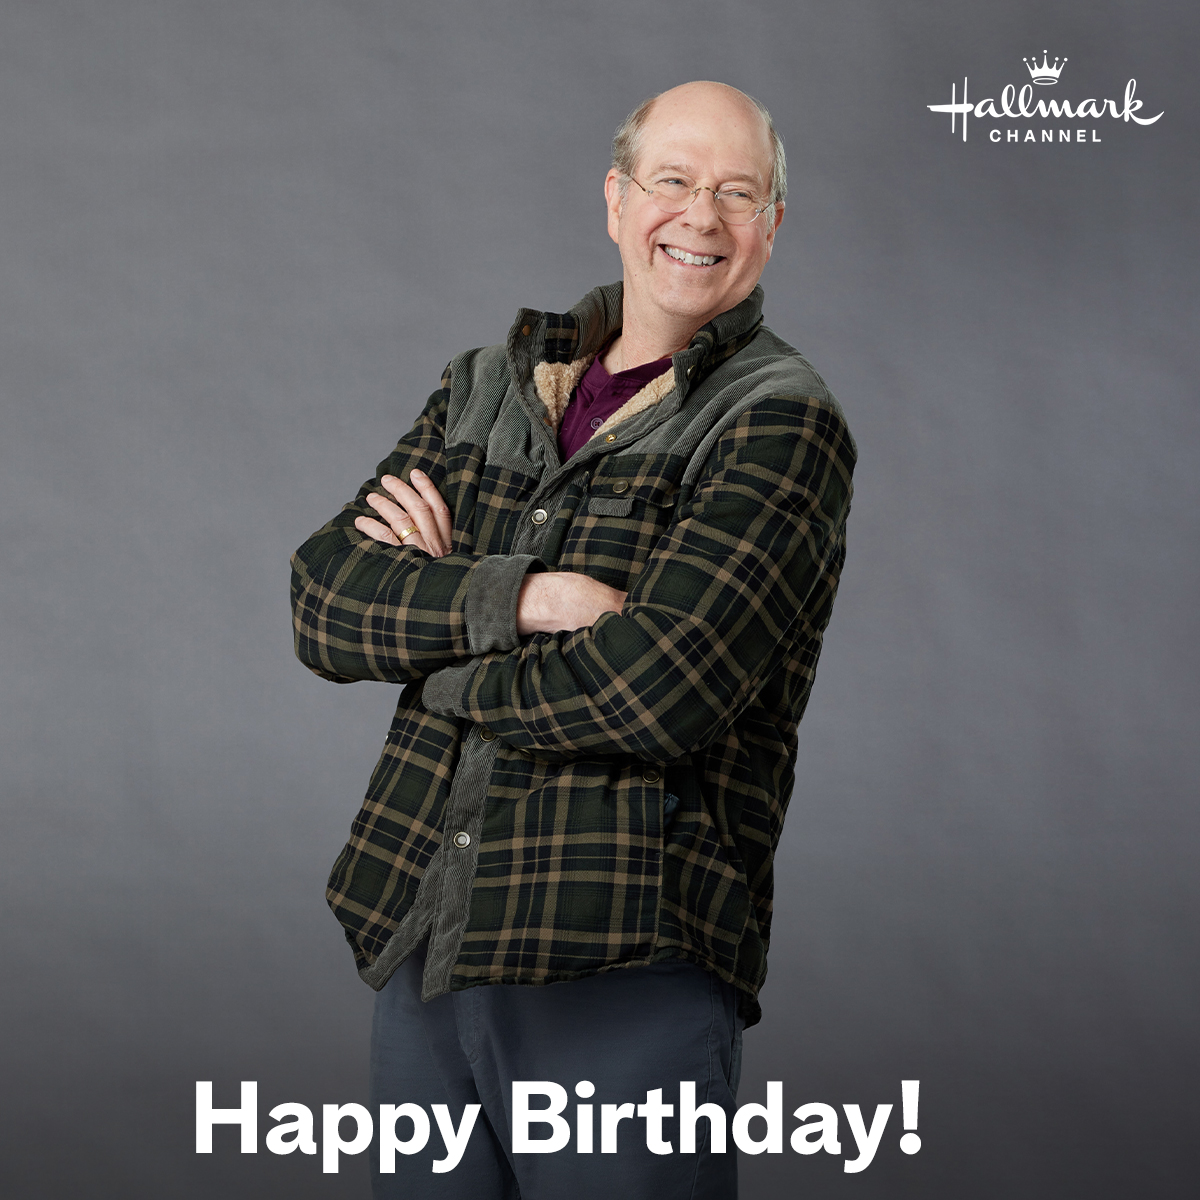 Wishing a fantastic birthday to @Tobolowsky from #HaulOutTheHolly: Lit Up! 🎂